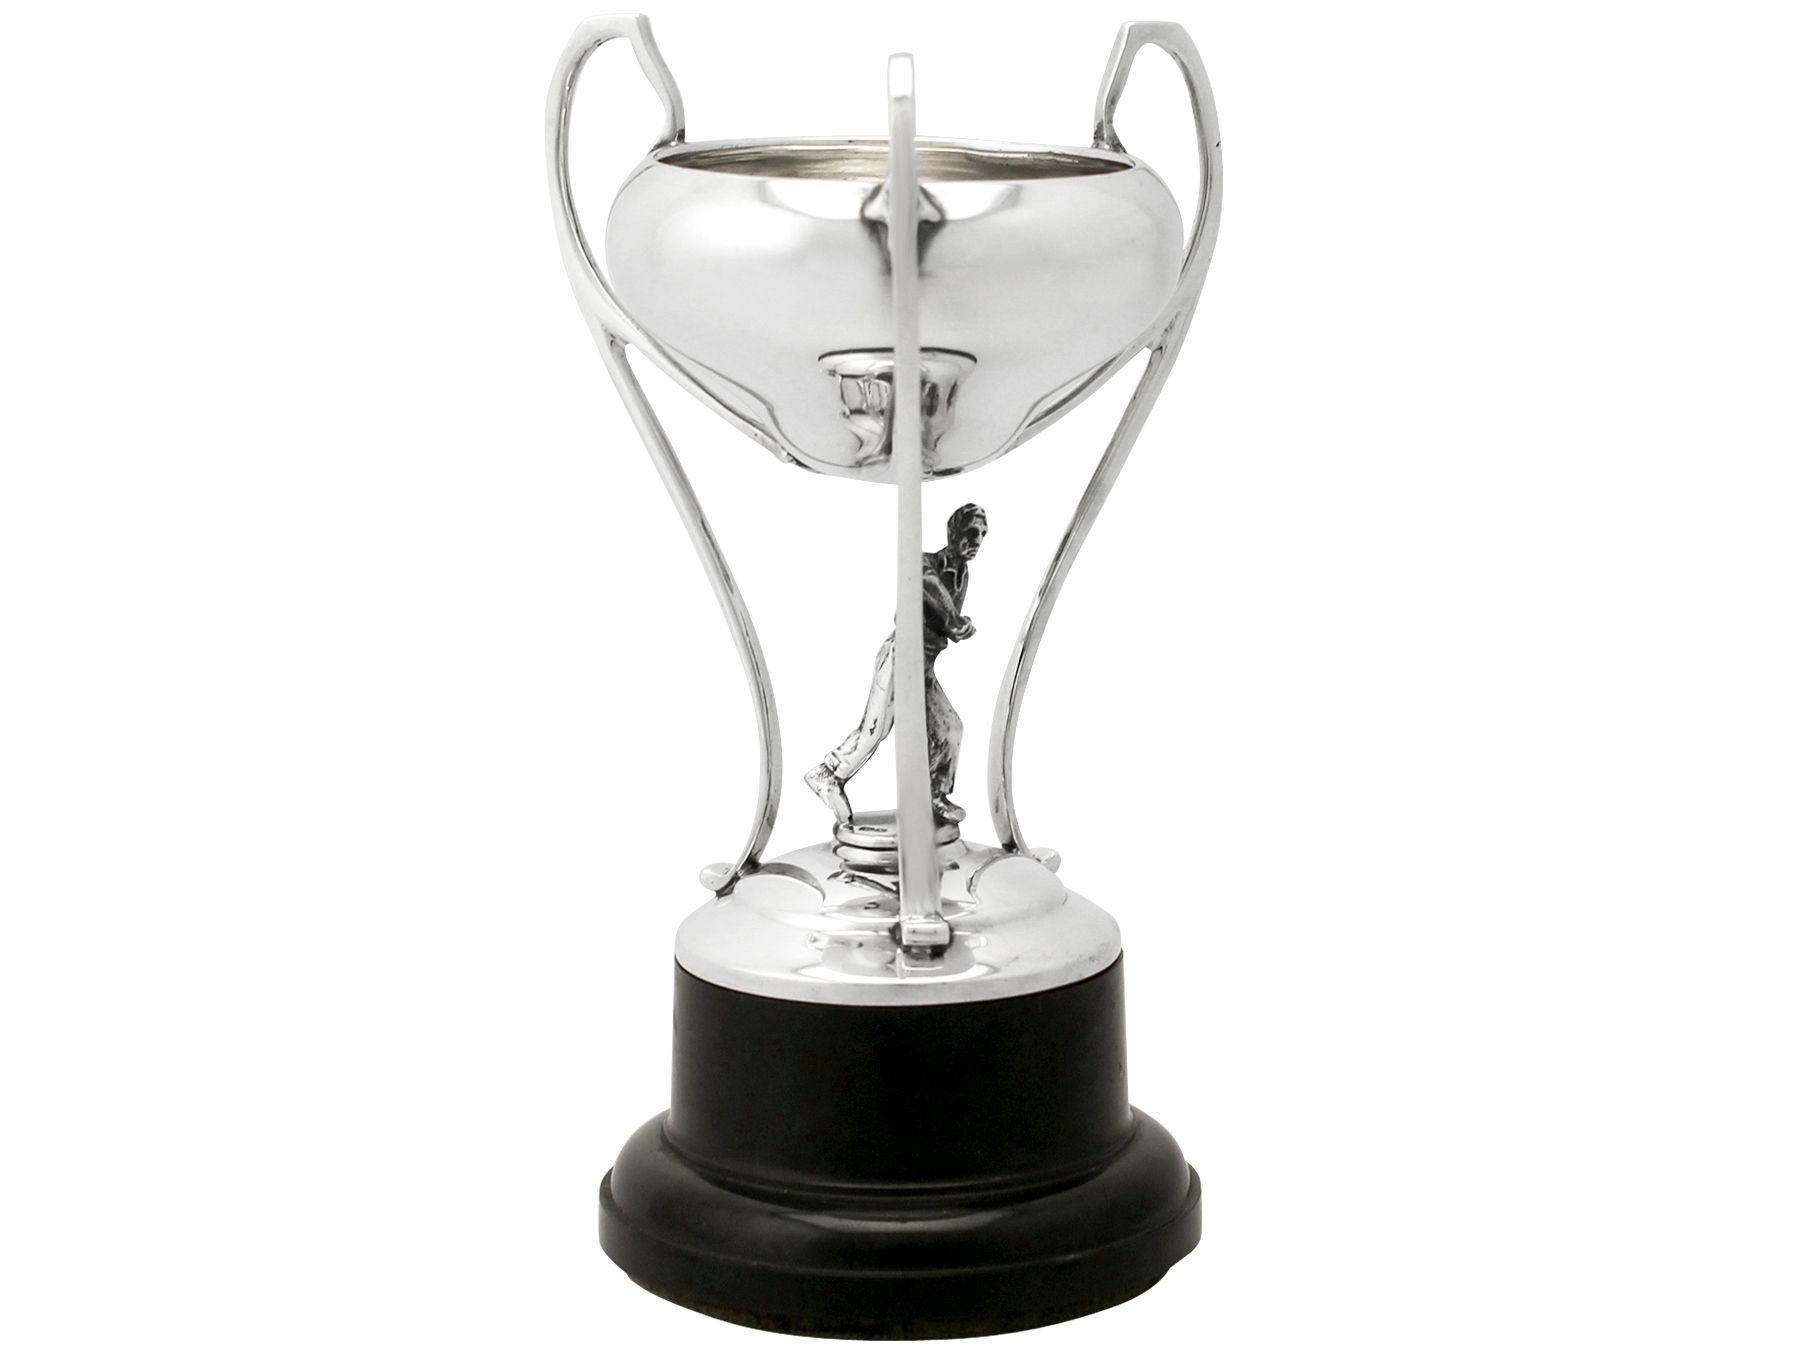 A fine and impressive vintage George VI English cast sterling silver presentation trophy in the form of a tennis player; an addition to our diverse presentation silverware collection.

This fine vintage George VI cast sterling silver presentation